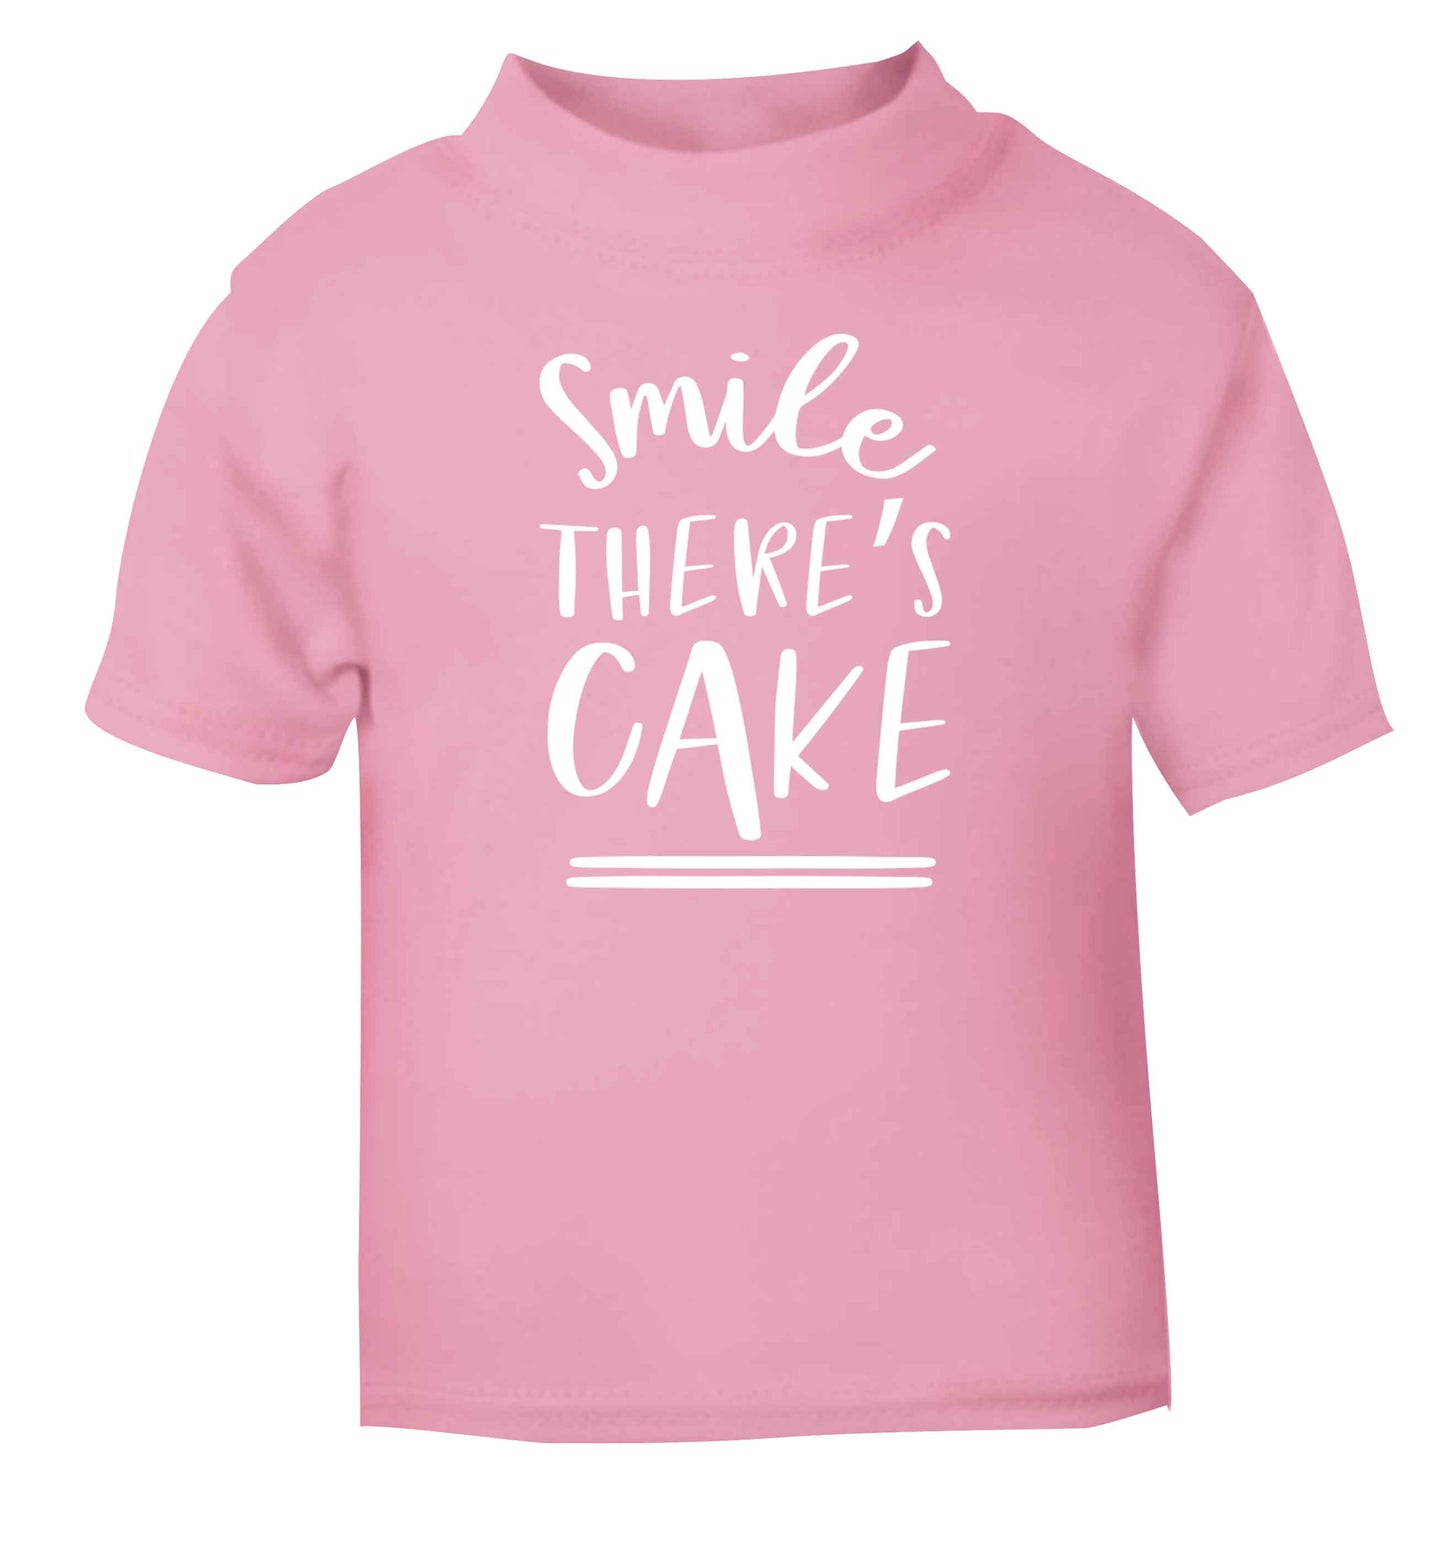 Smile there's cake light pink Baby Toddler Tshirt 2 Years